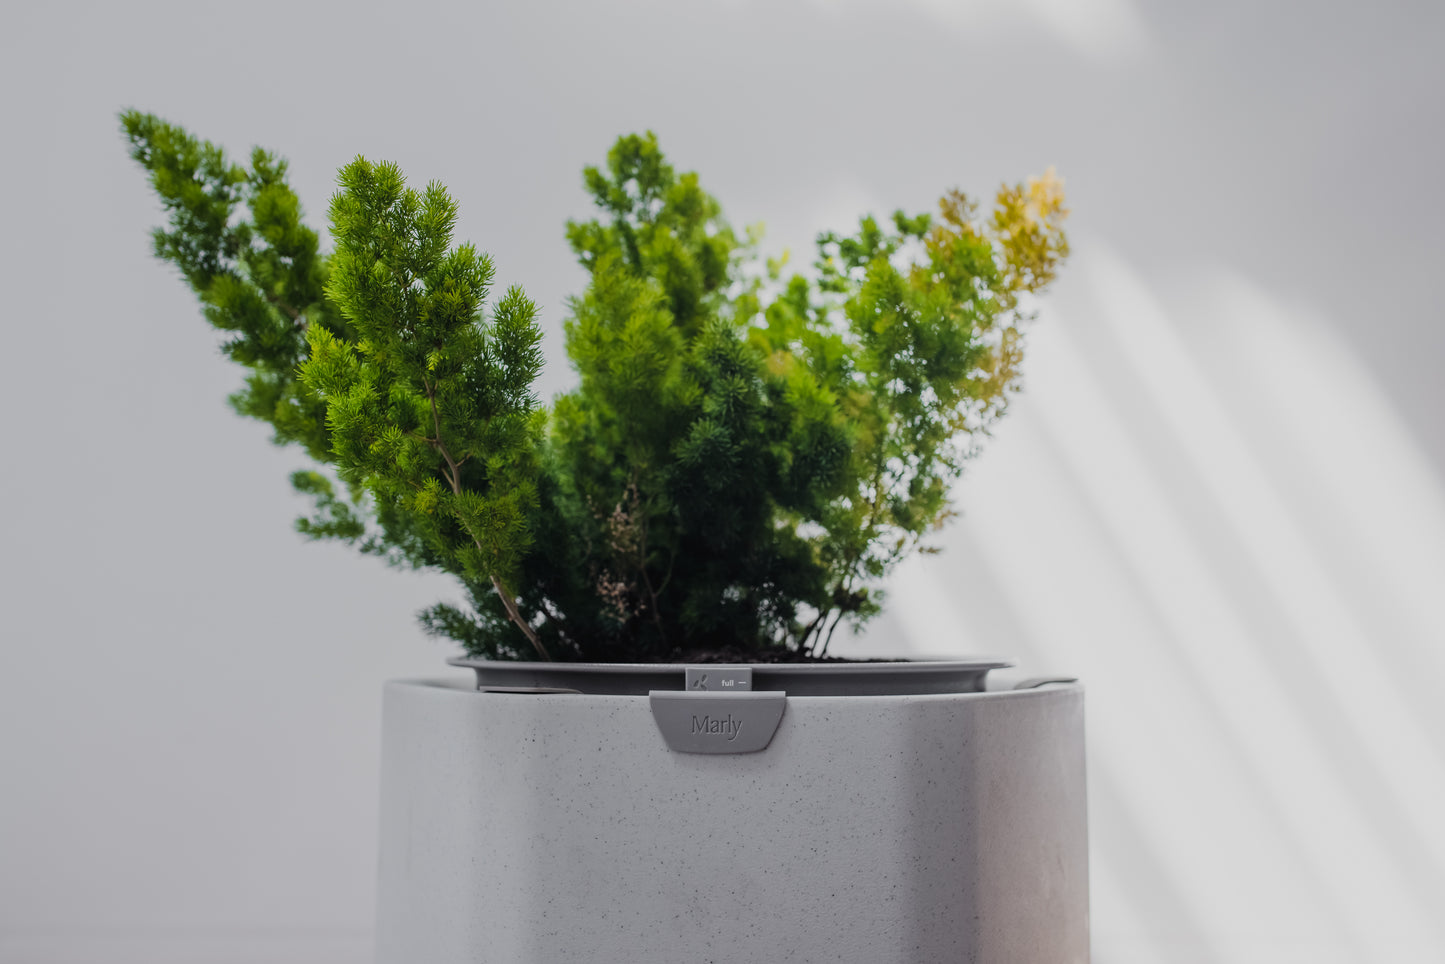 The Marly Self Watering Planter